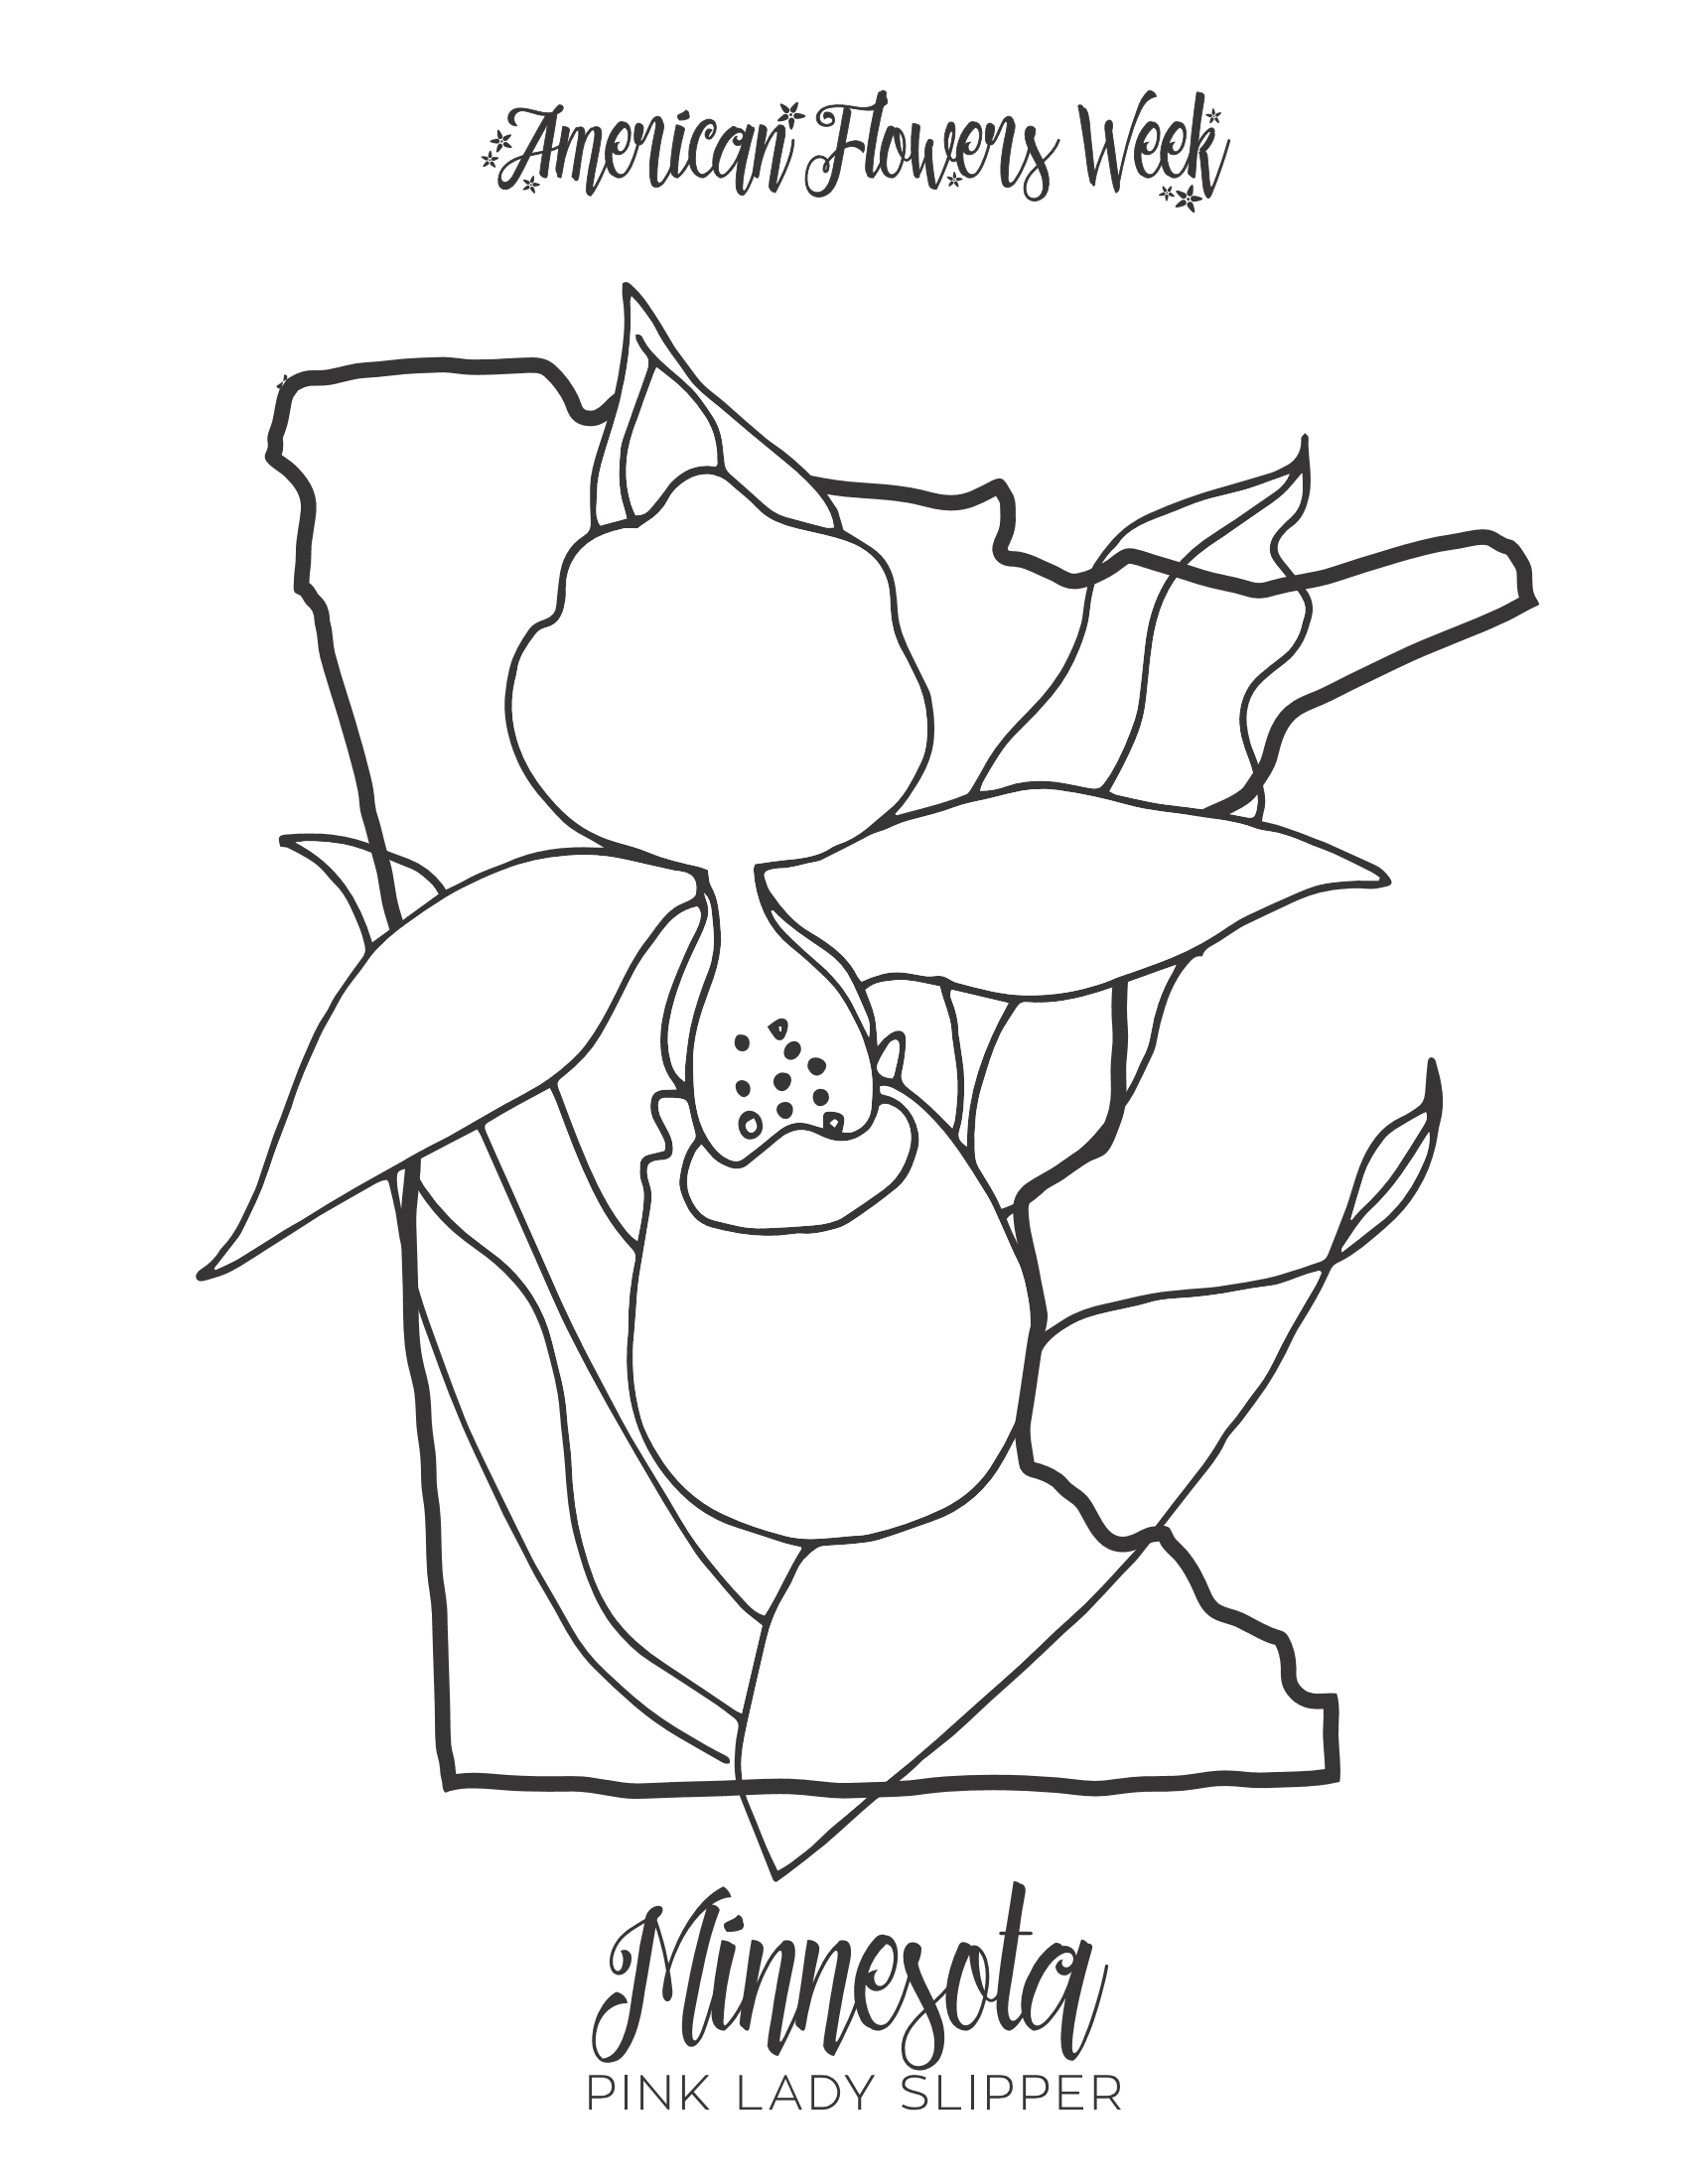 missouri state flower 50 state flowers free coloring pages american flowers week missouri flower state 